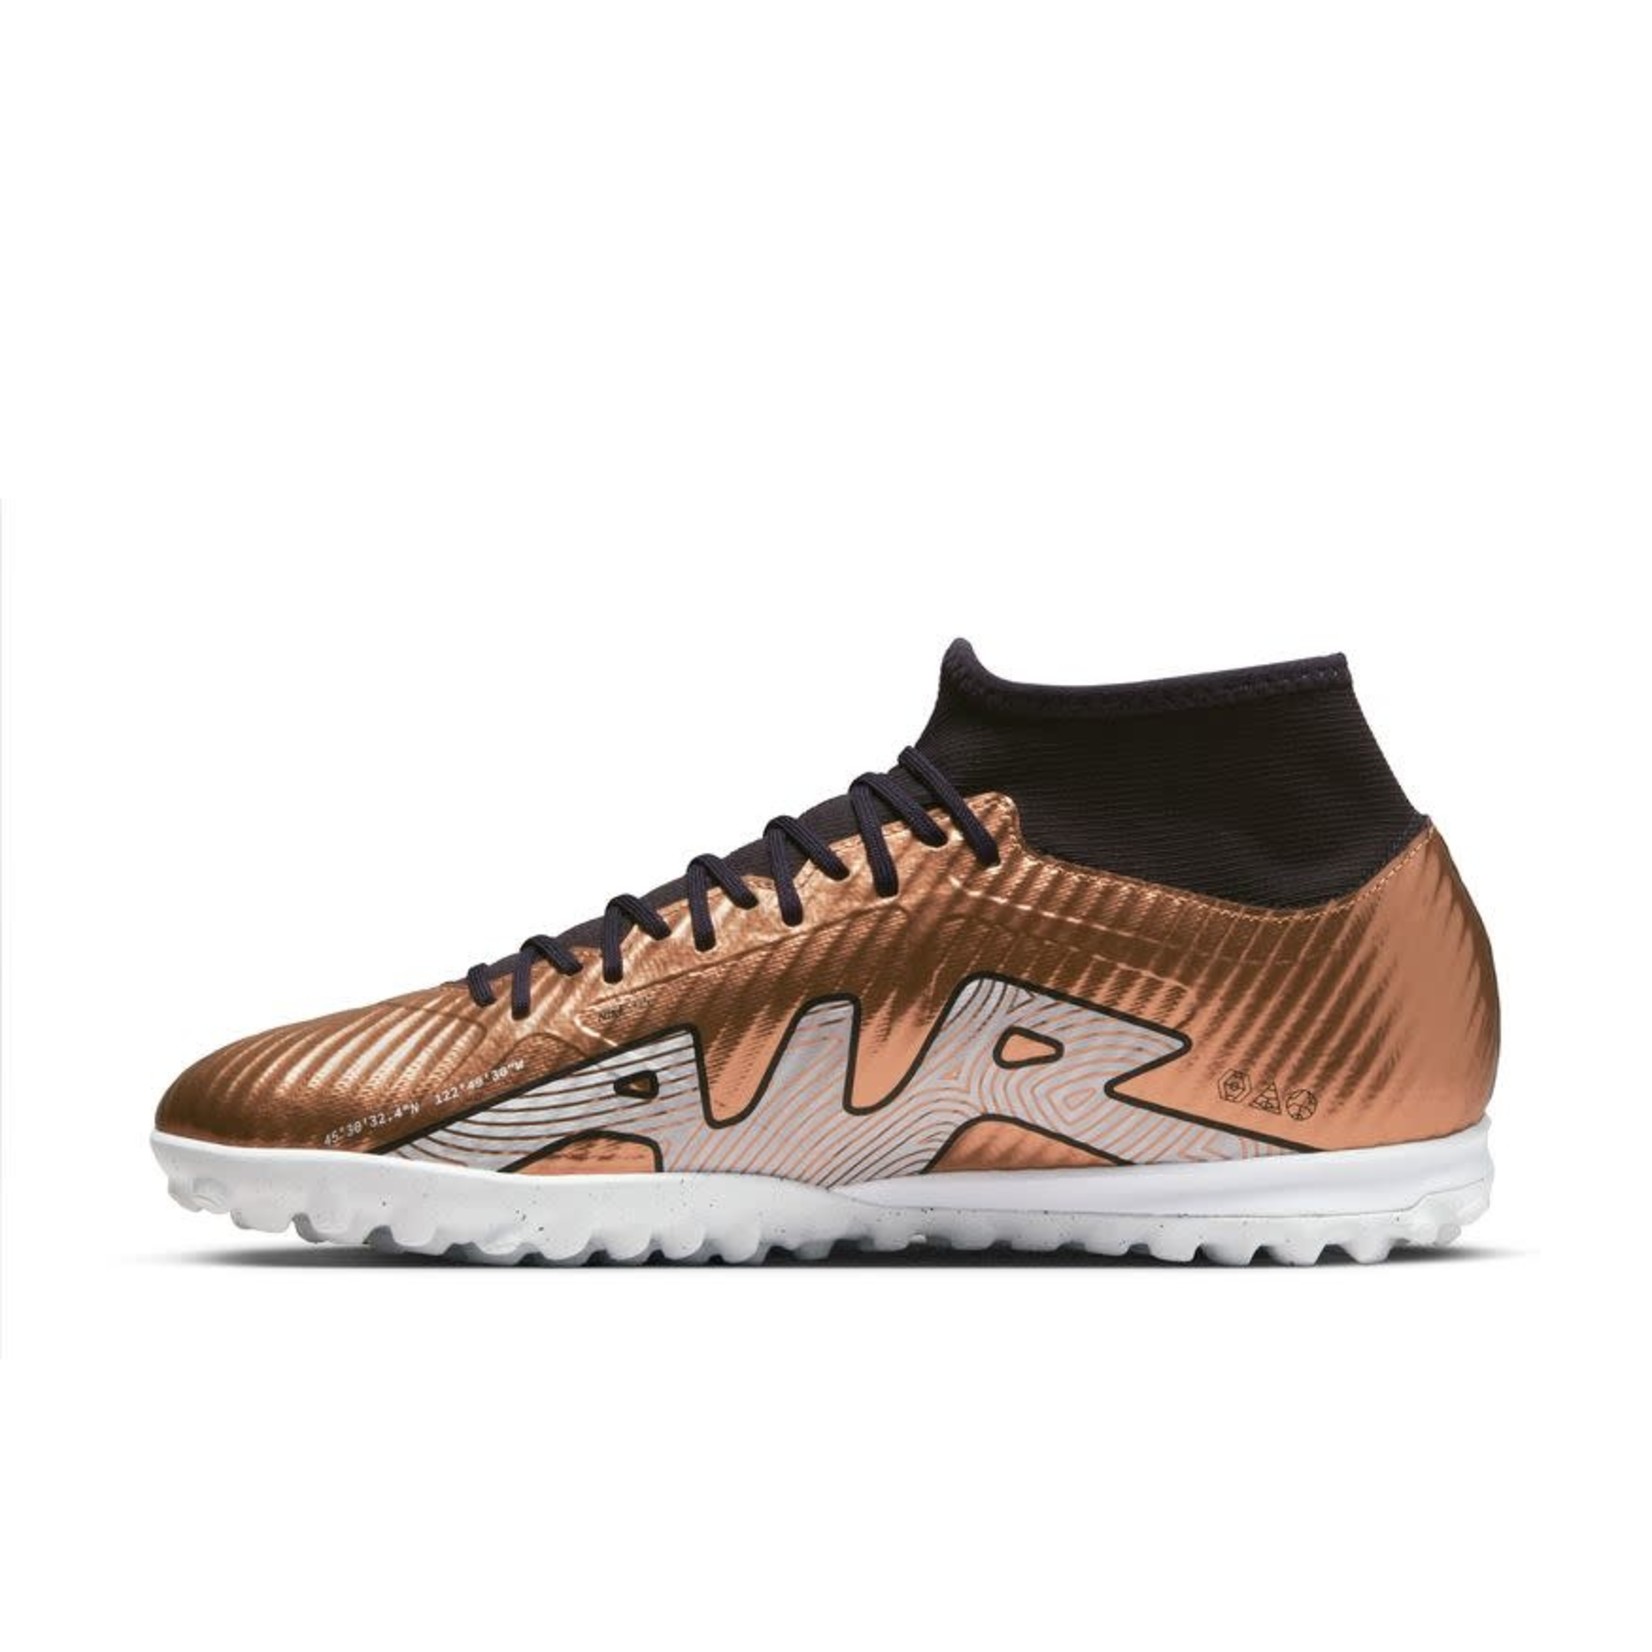 Nike Mercurial Superfly Academy Astro Turf Football Trainers Metallic  Copper, €79.00